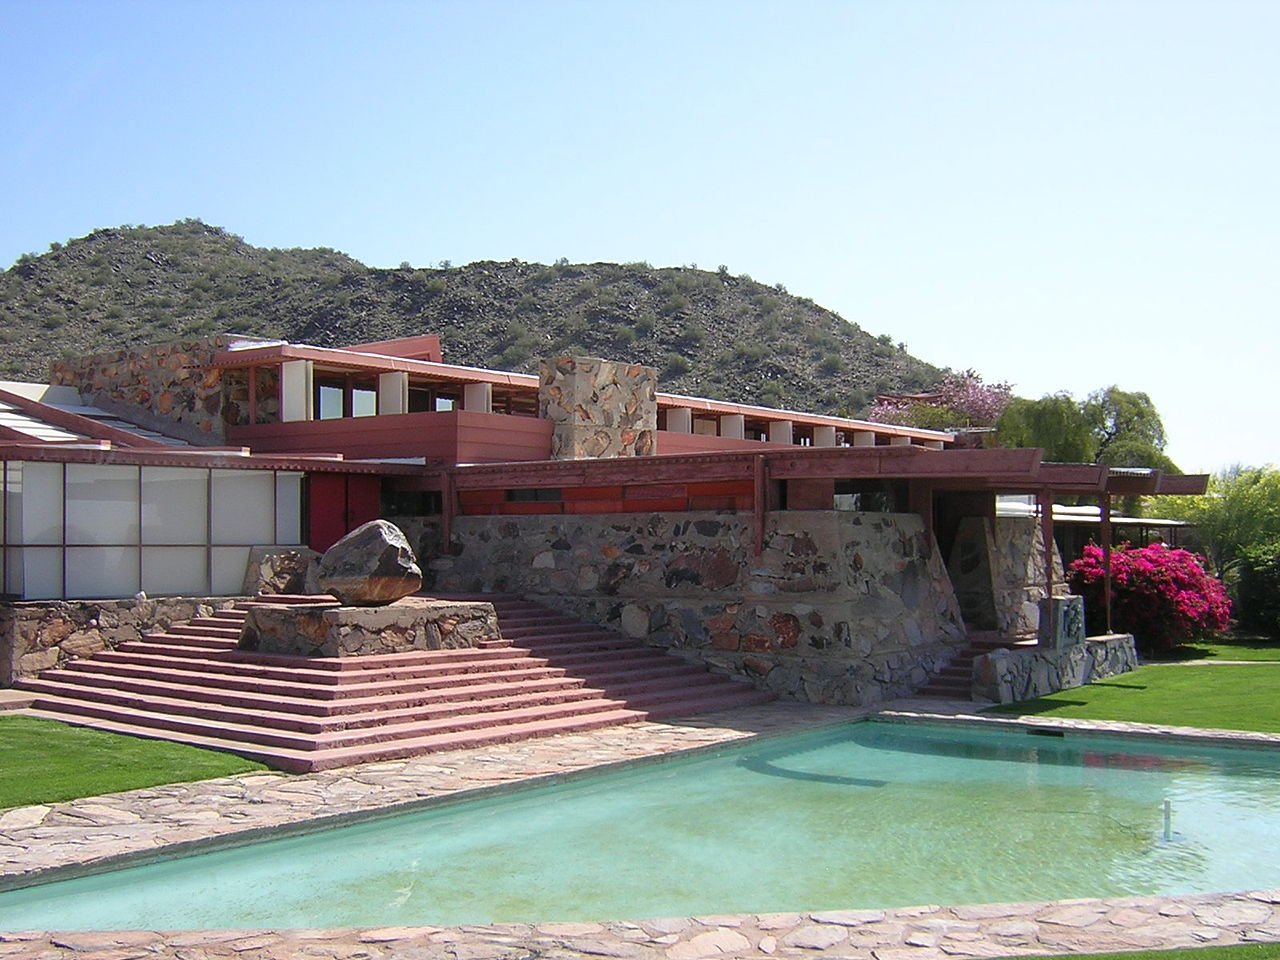 Taliesin West, fountain and terrace, with dining and dormitory area beyond, photo by Lar, fonte English Wikipedia